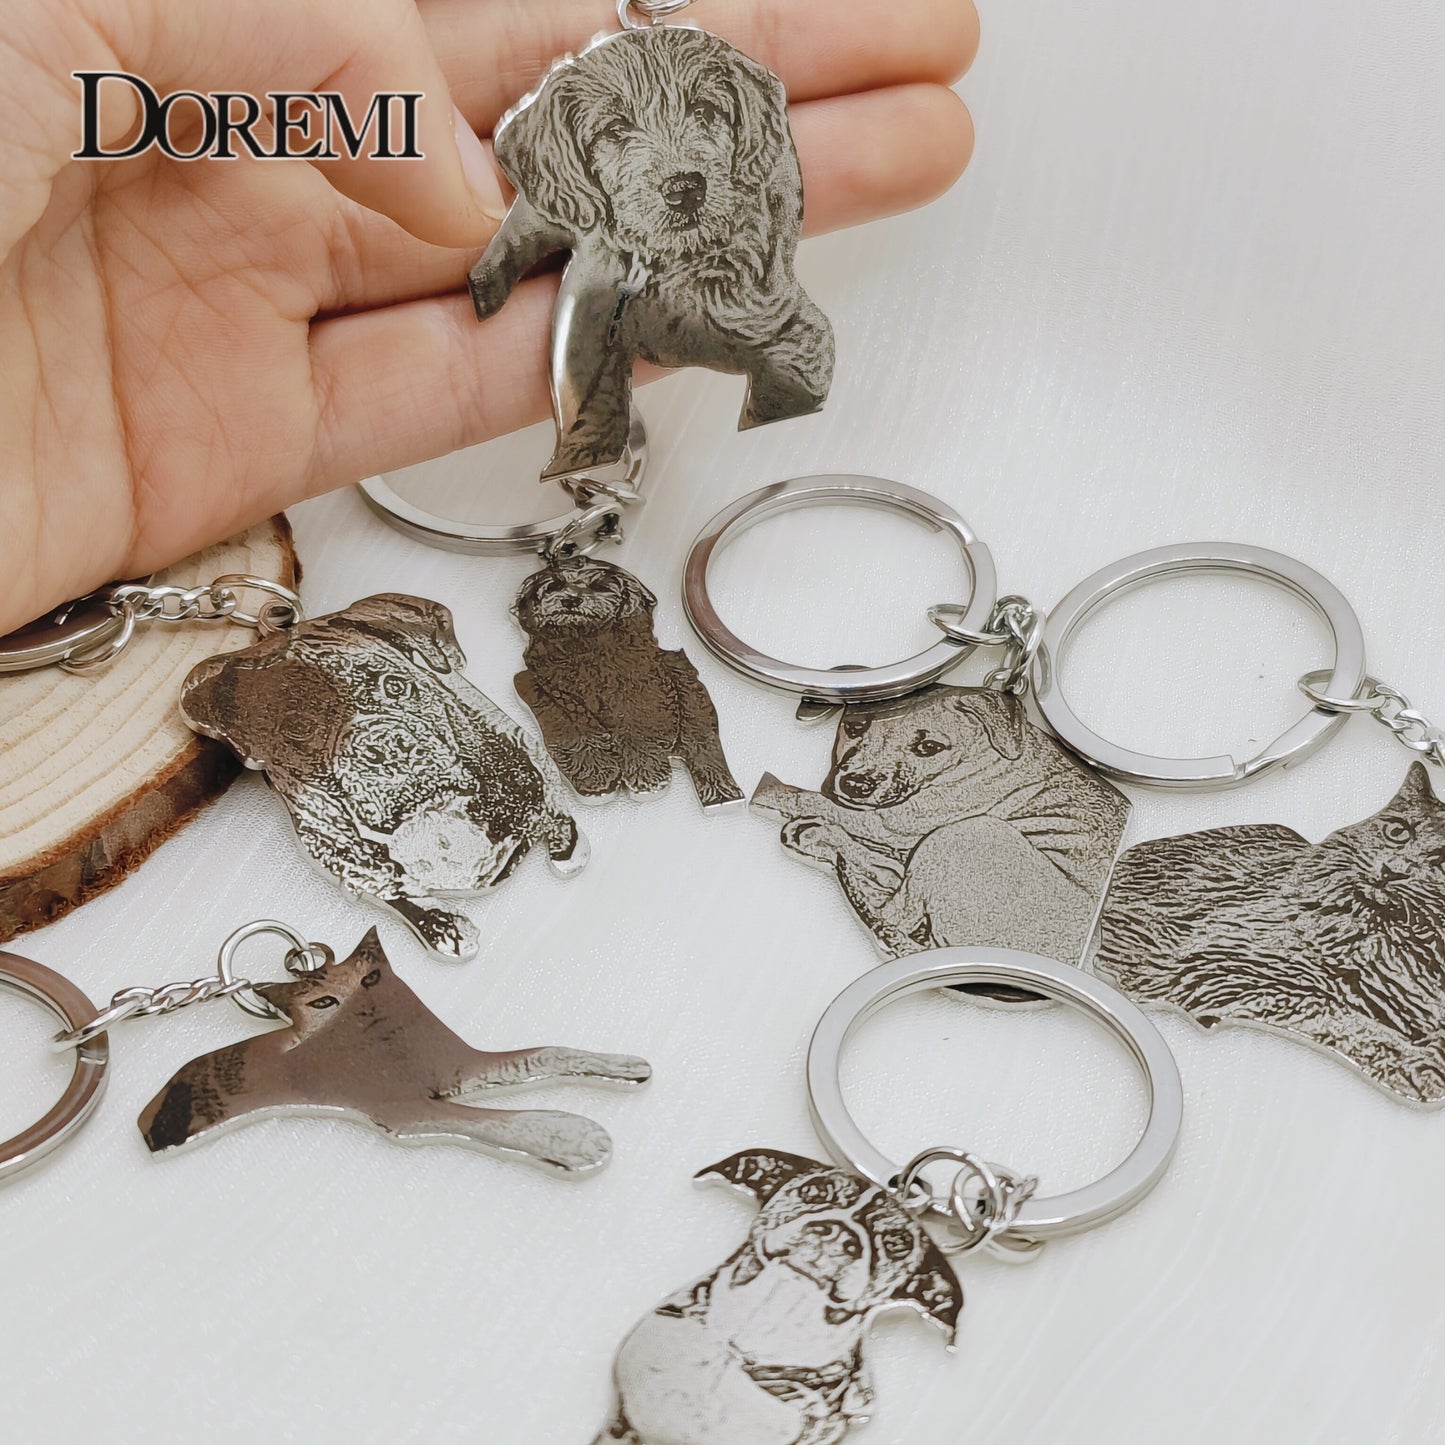 DOREMI Stainless Personalized Engraving Customize Your Pet Photo Necklace Dog Custom Cat Picture Keychain Birthday Memory Gift